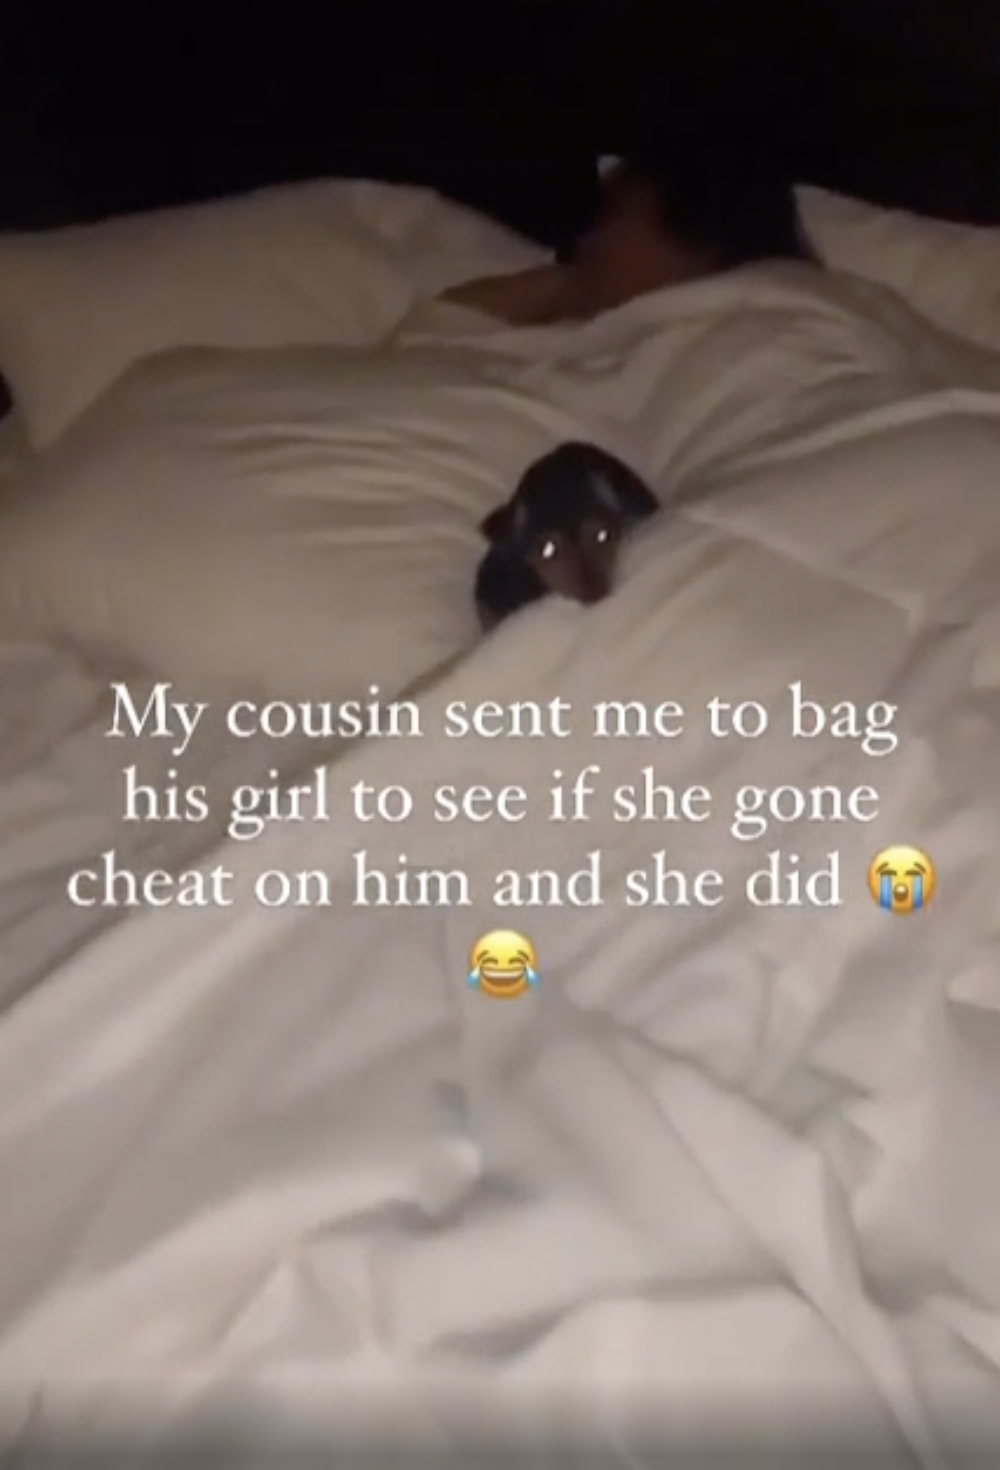 light - My cousin sent me to bag his girl to see if she gone cheat on him and she did